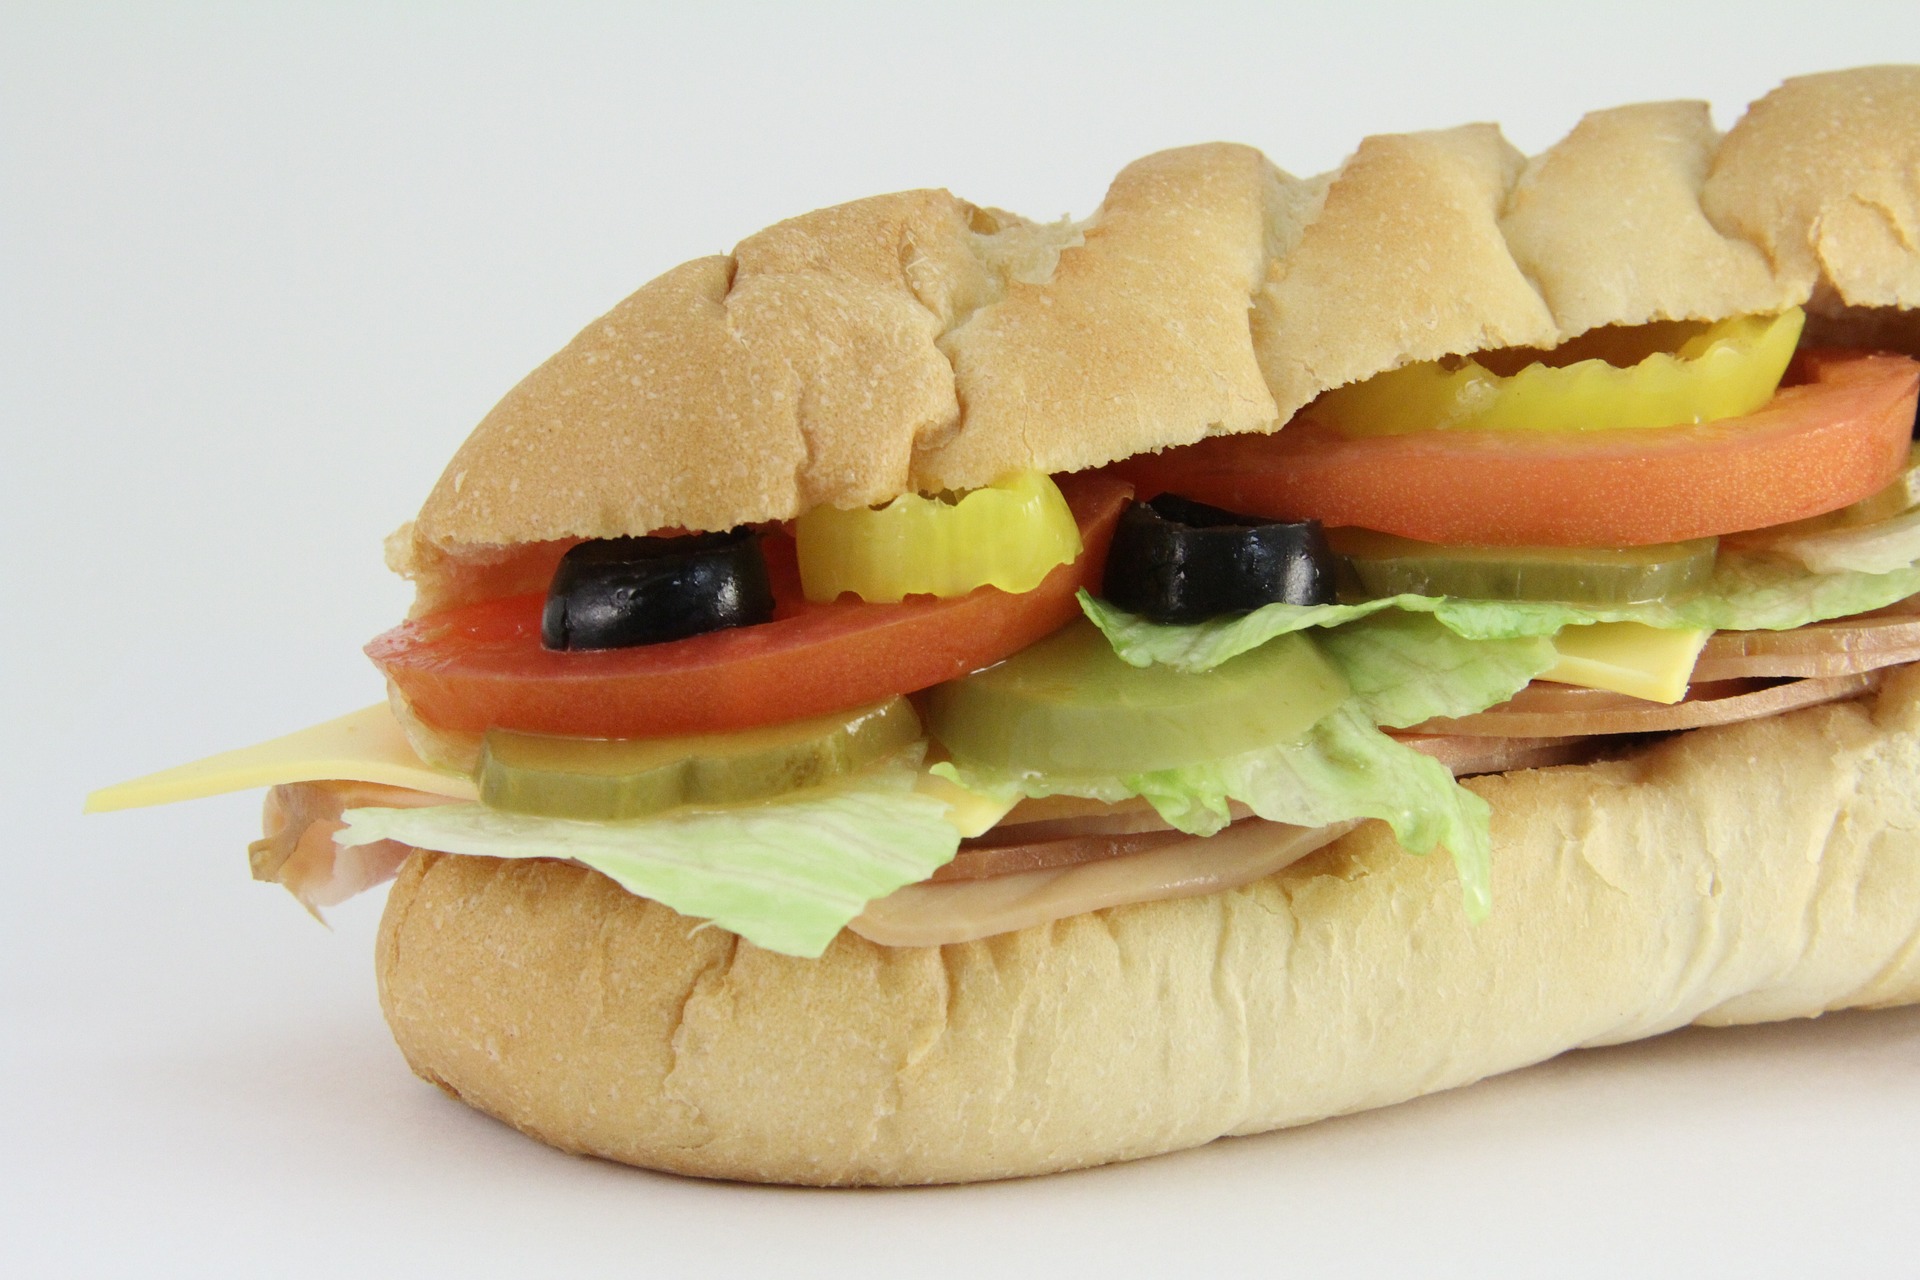 A subway sandwich with tomatoes, olives and deli meat, which contains Sulphites; our sulhpite allergy compensation solicitors can assist you with making a compensation claim.  Click this picture to read more about sulphite allergy compensation claims.